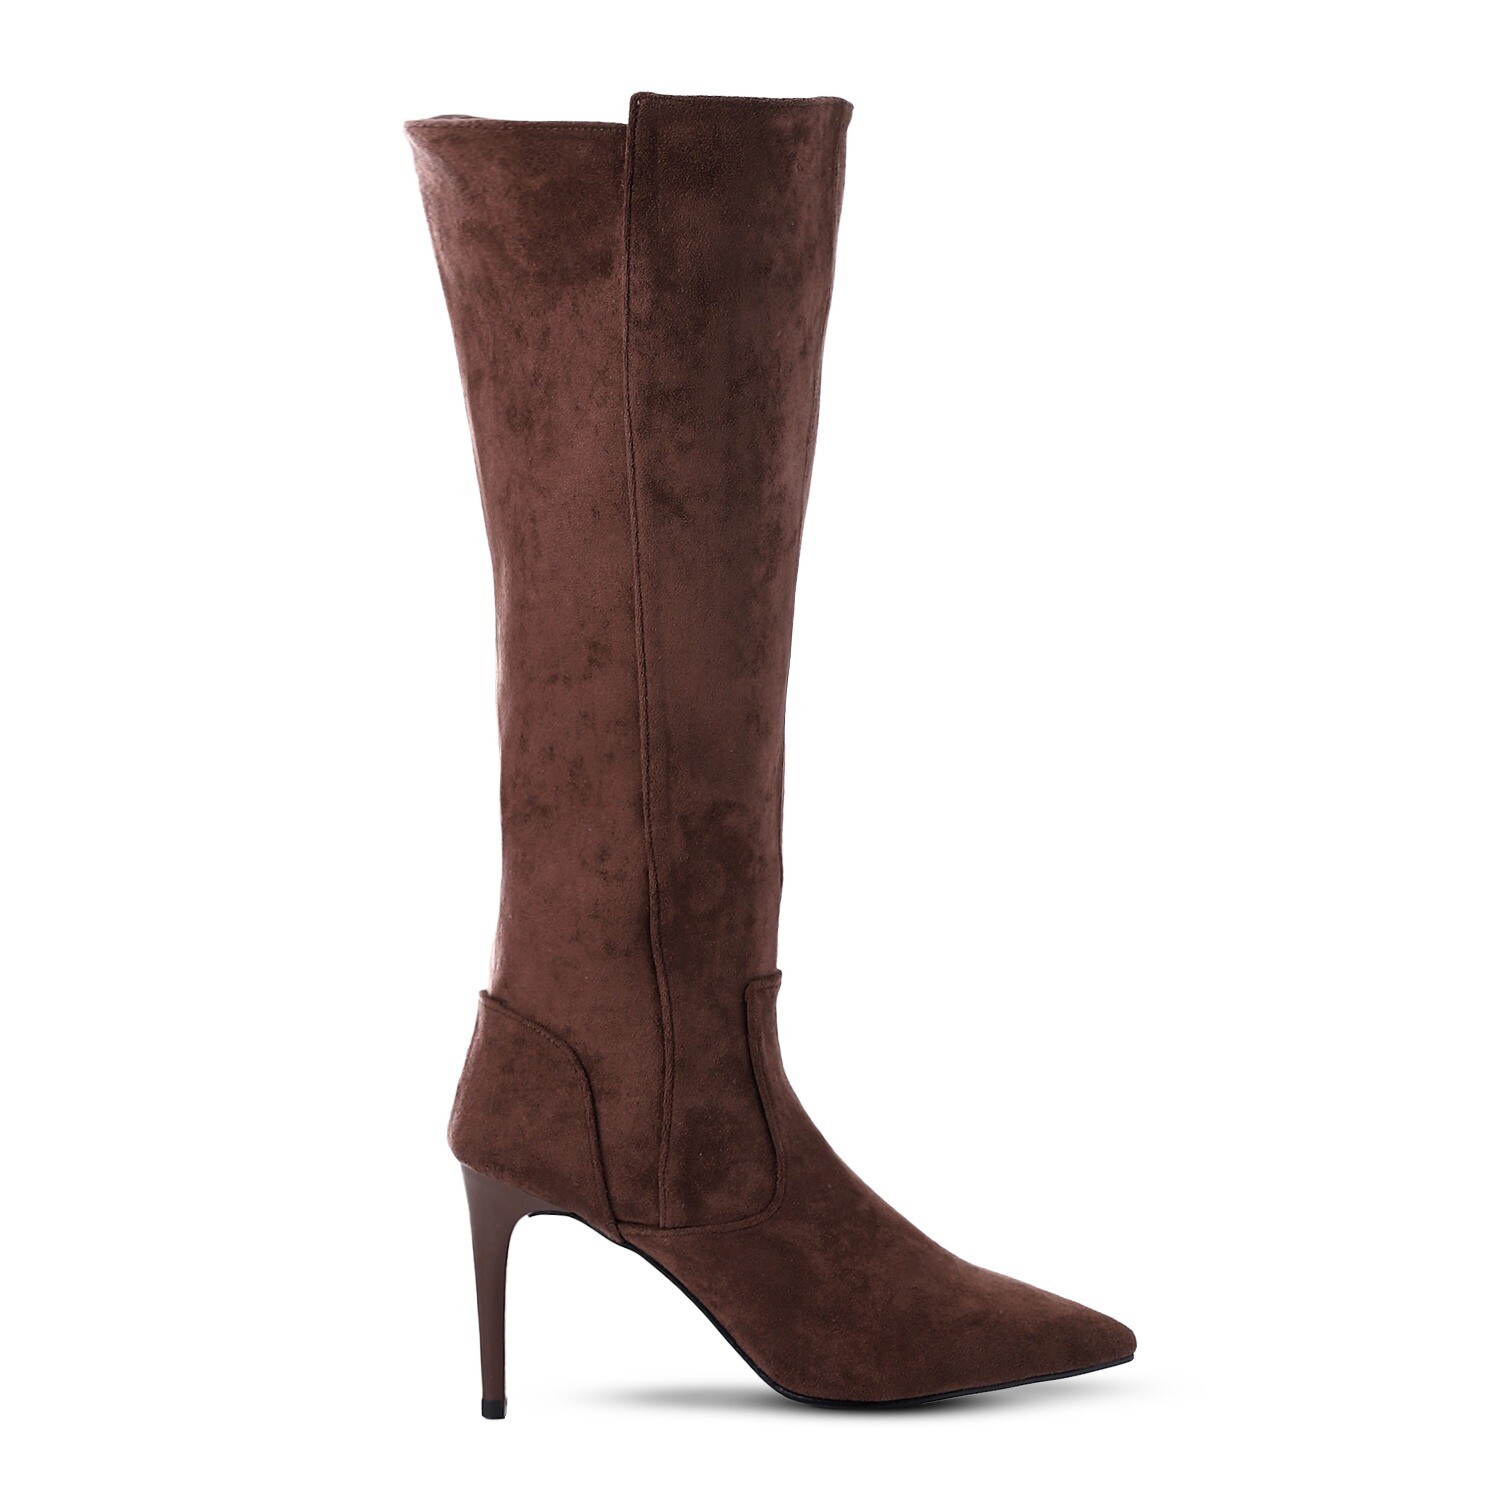 Pointed Toecap Suede Knee High Boots - Walnut Brown 3434